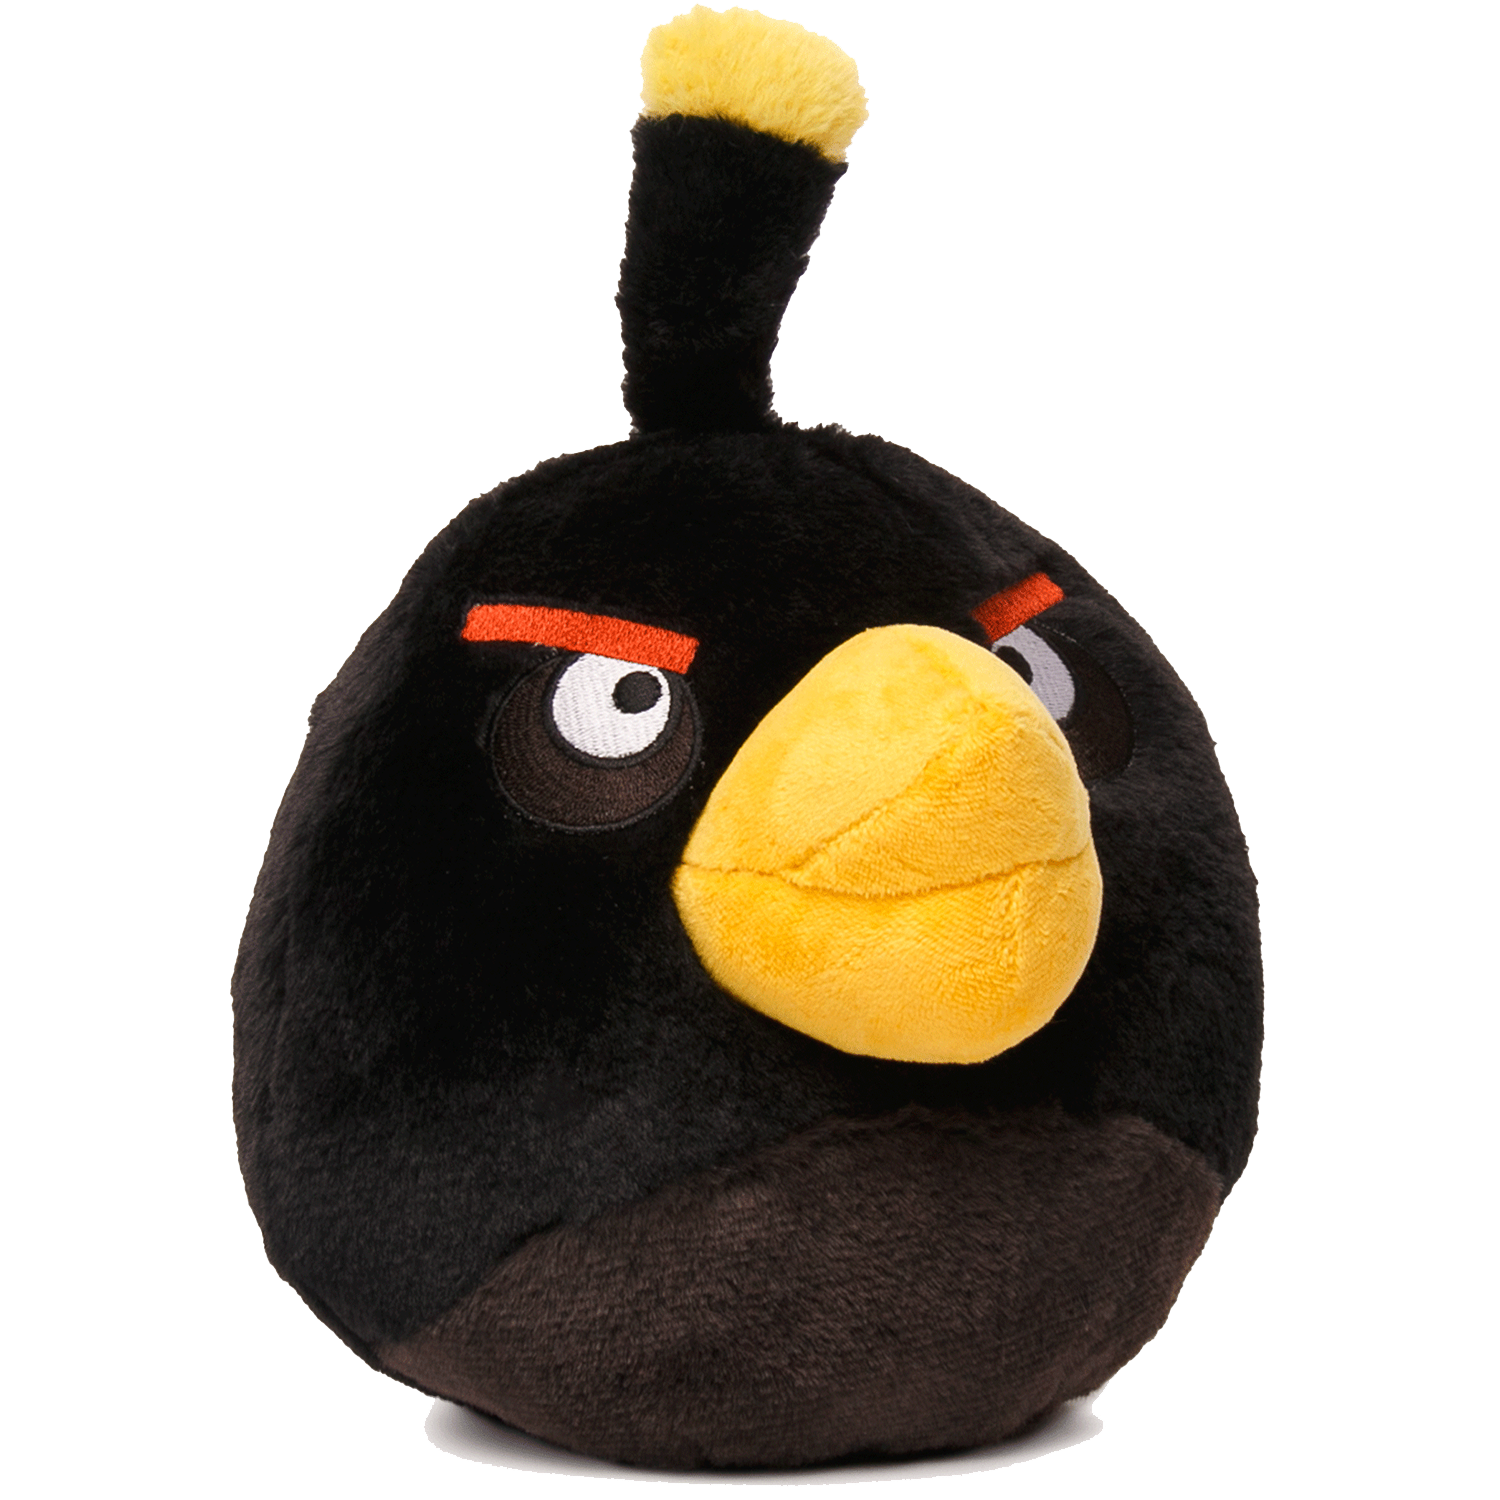 new angry birds plush toys